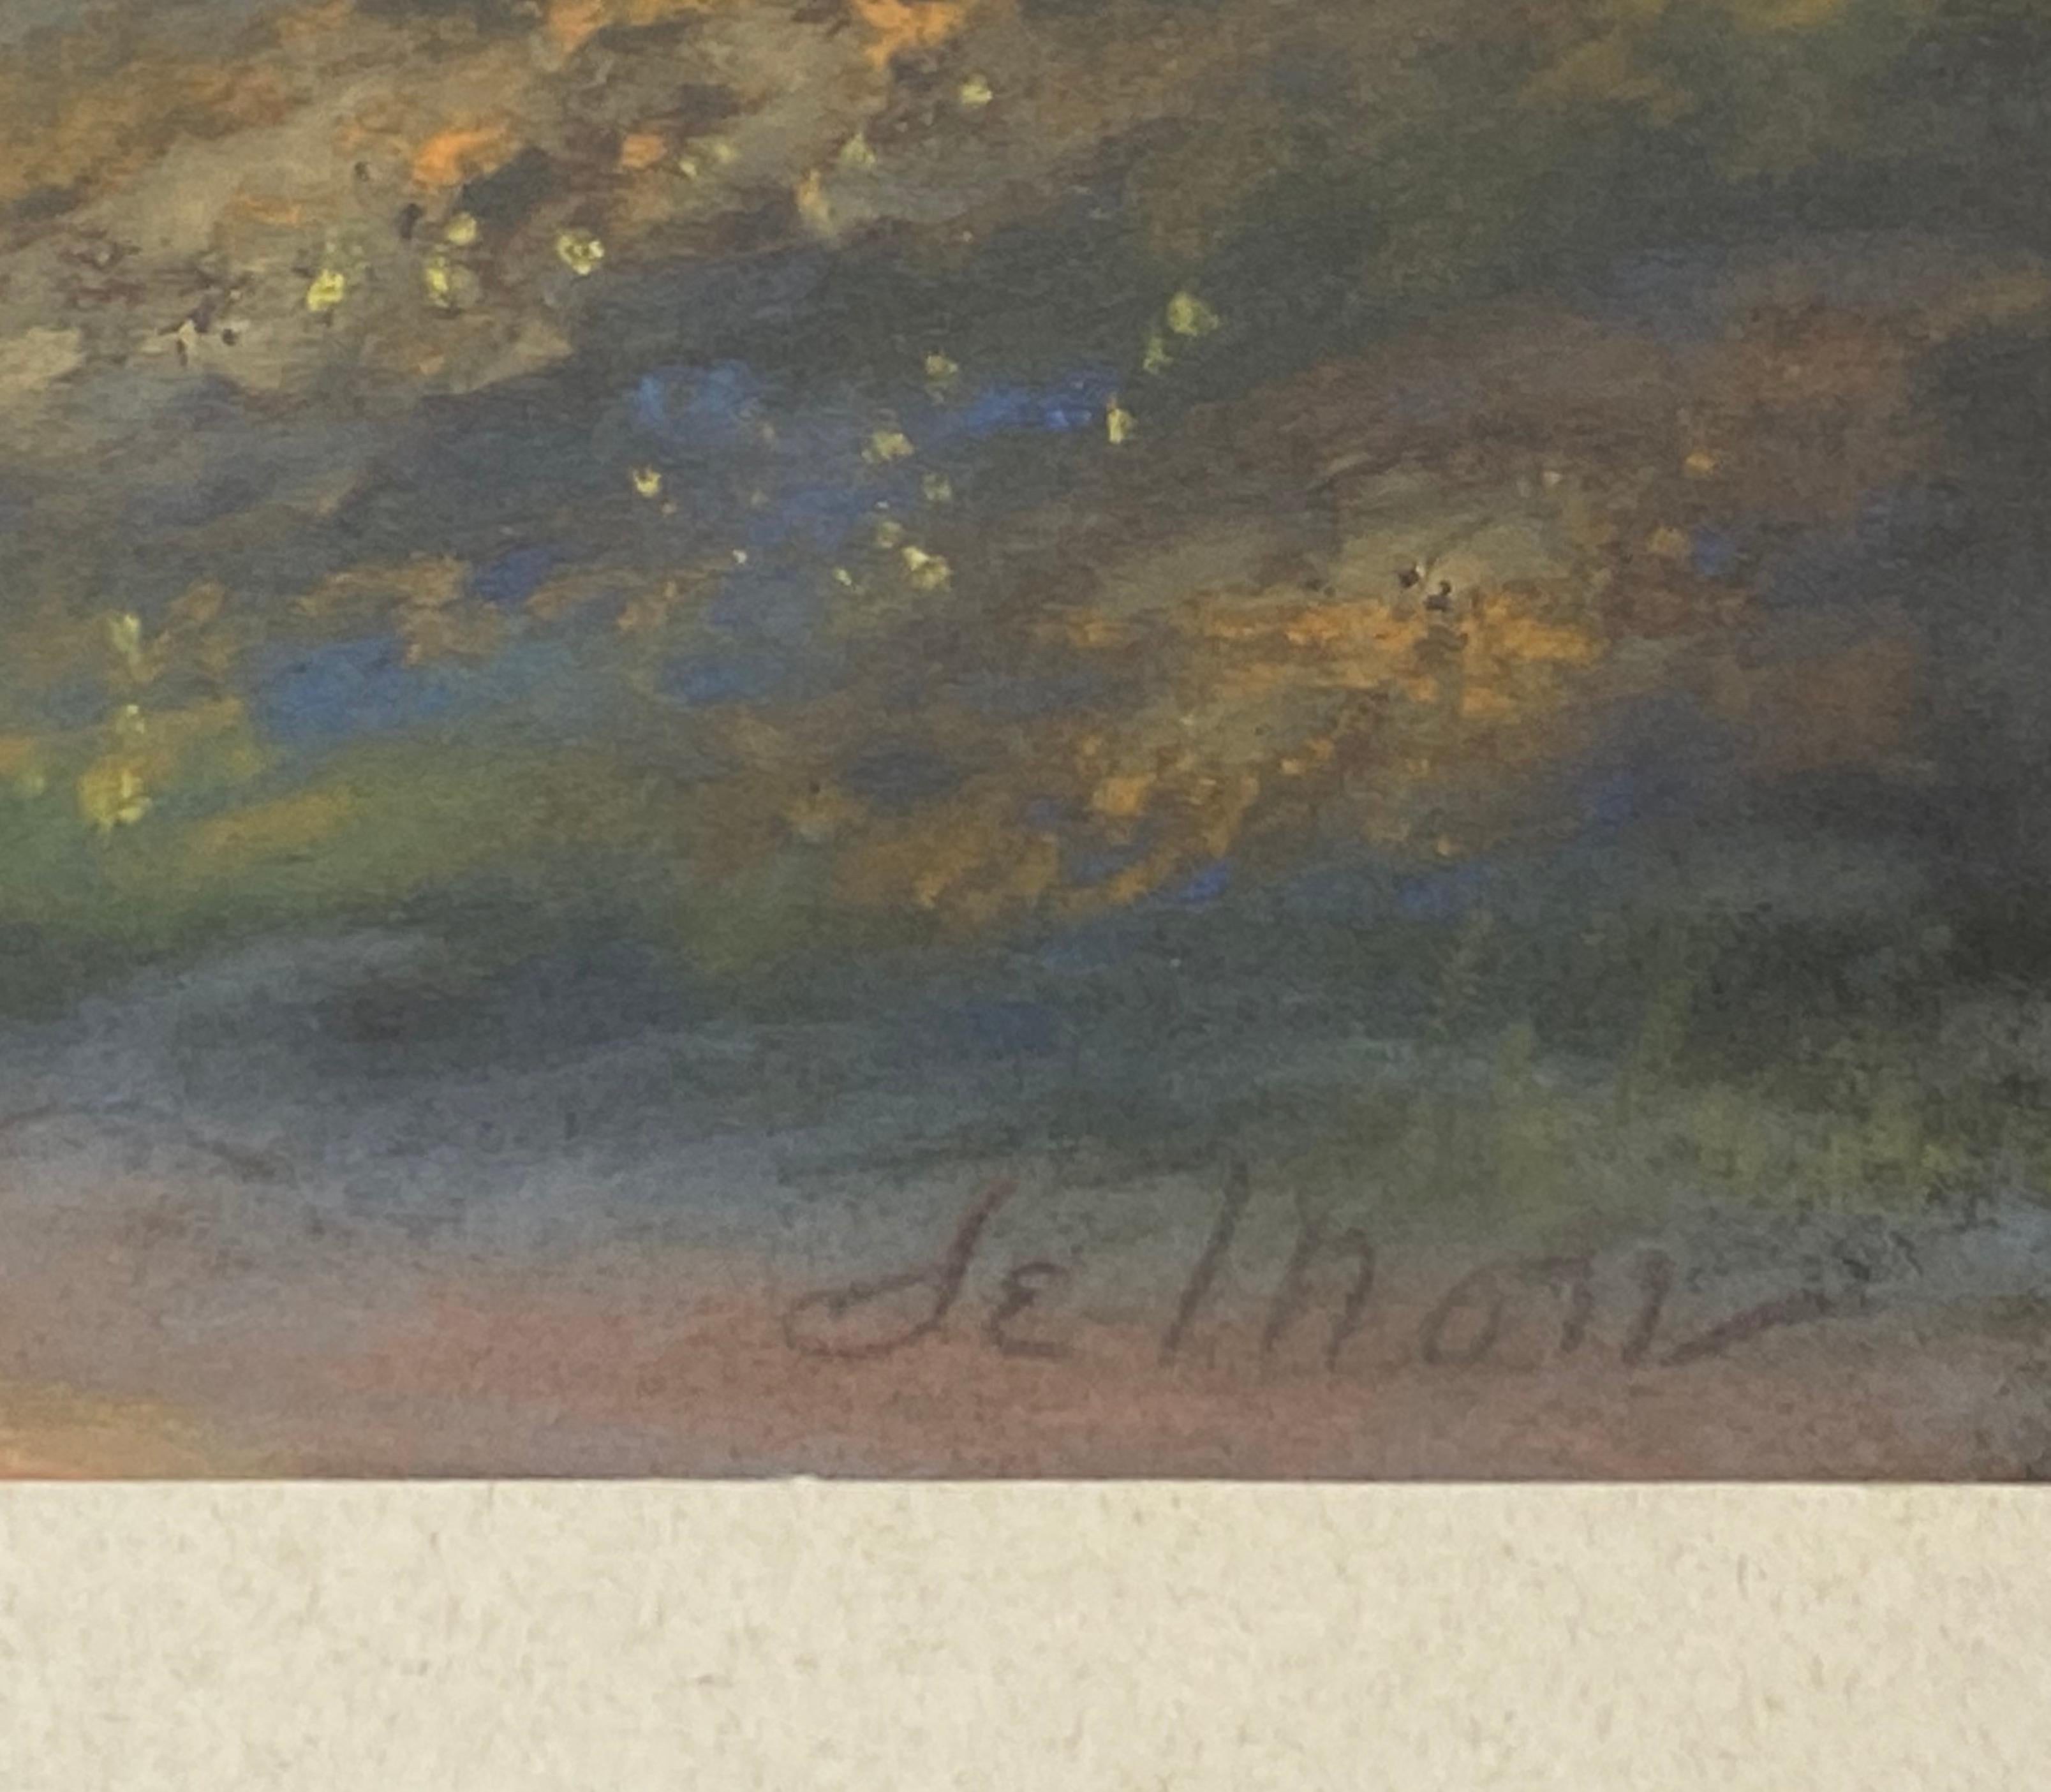 Vintage Pastel Mountain Landscape

Beautiful pastel landscape with shades of aurora borealis color

Signed in the lower right corner (illegible - see images)

Dimensions 18